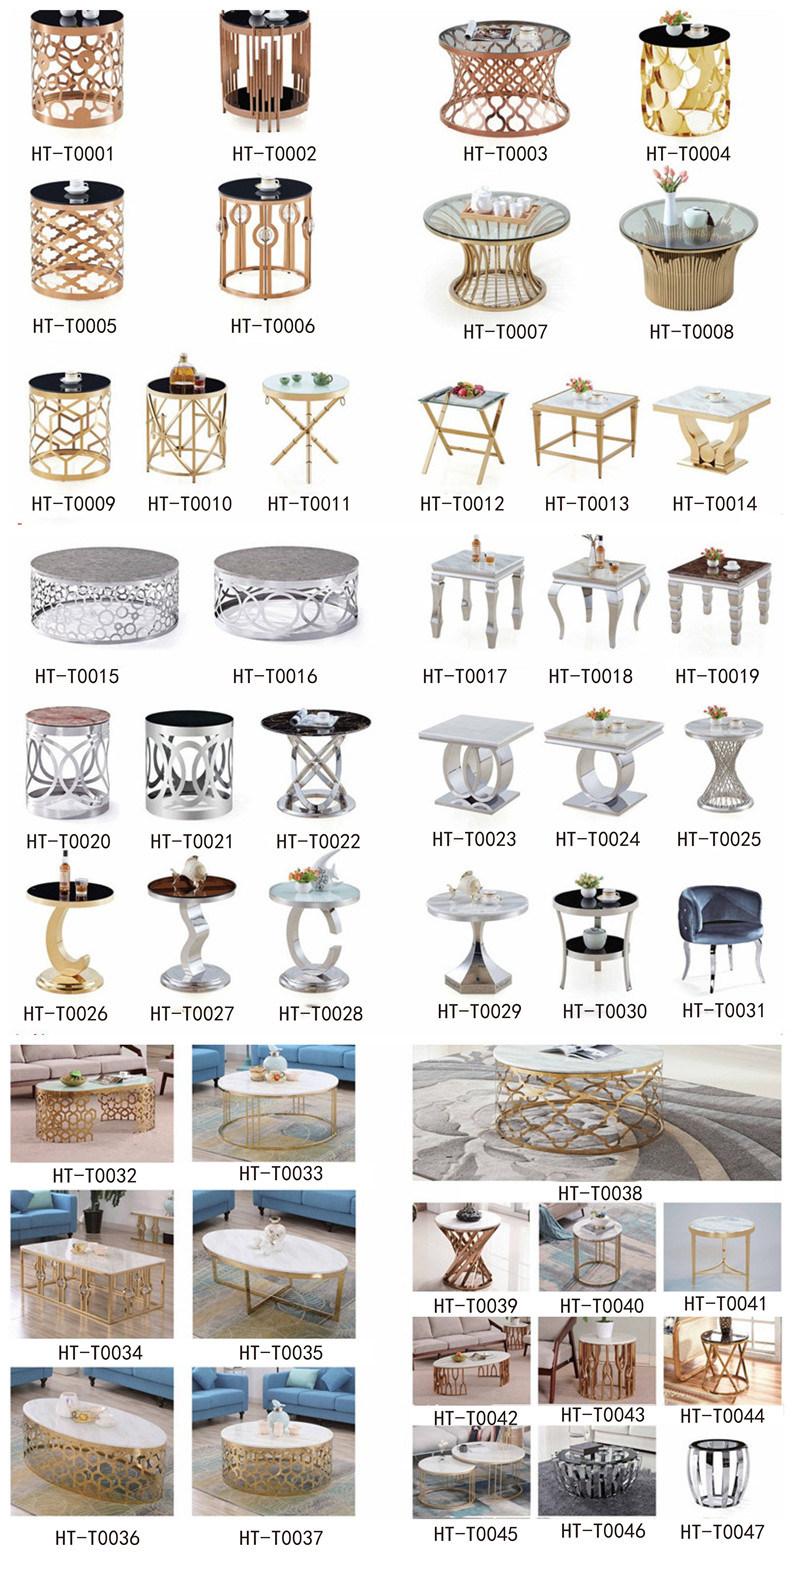 Modern Hotel Table / Metal Living Room Table / Small Table / Console Table / Side Table / Stainless Steel Coffee Table Lamp Table Bedroom Side Table